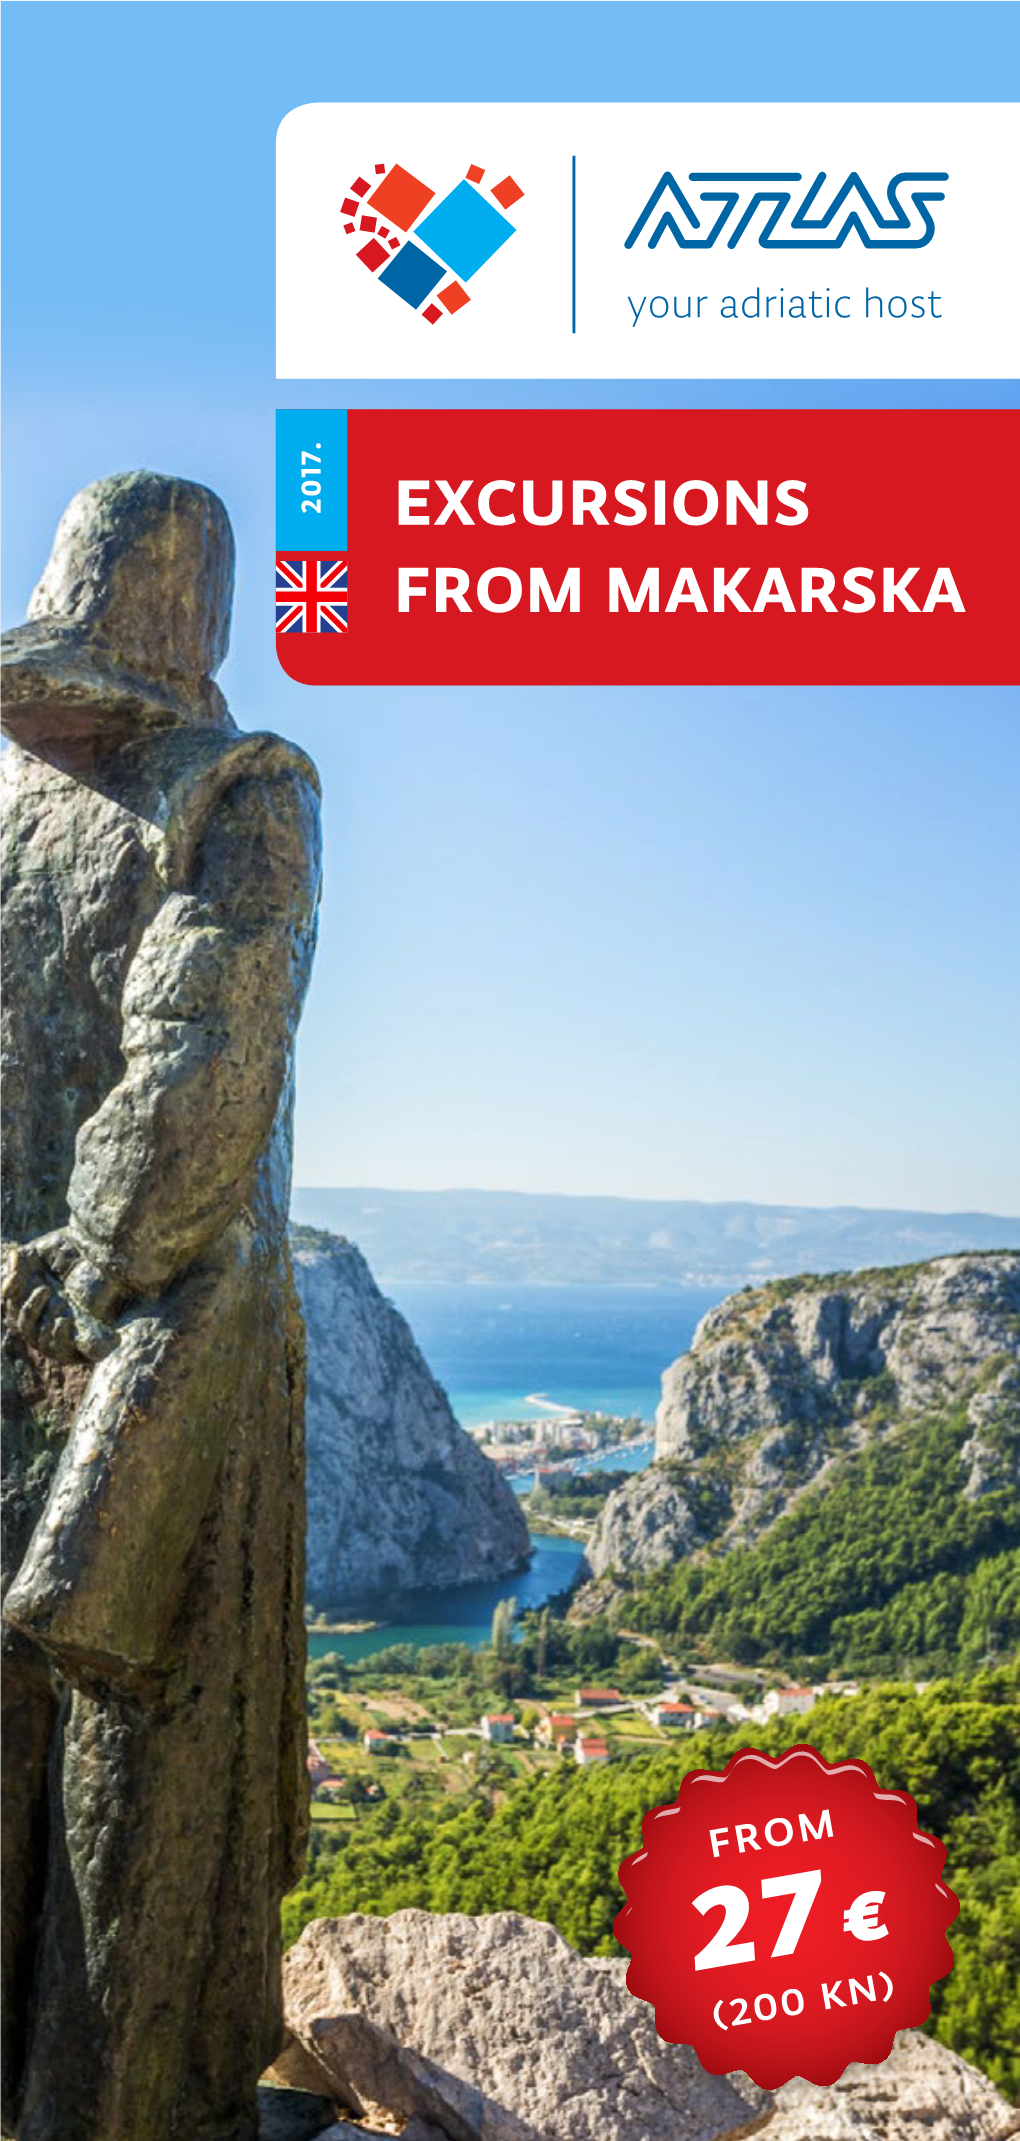 Excursions from Makarska